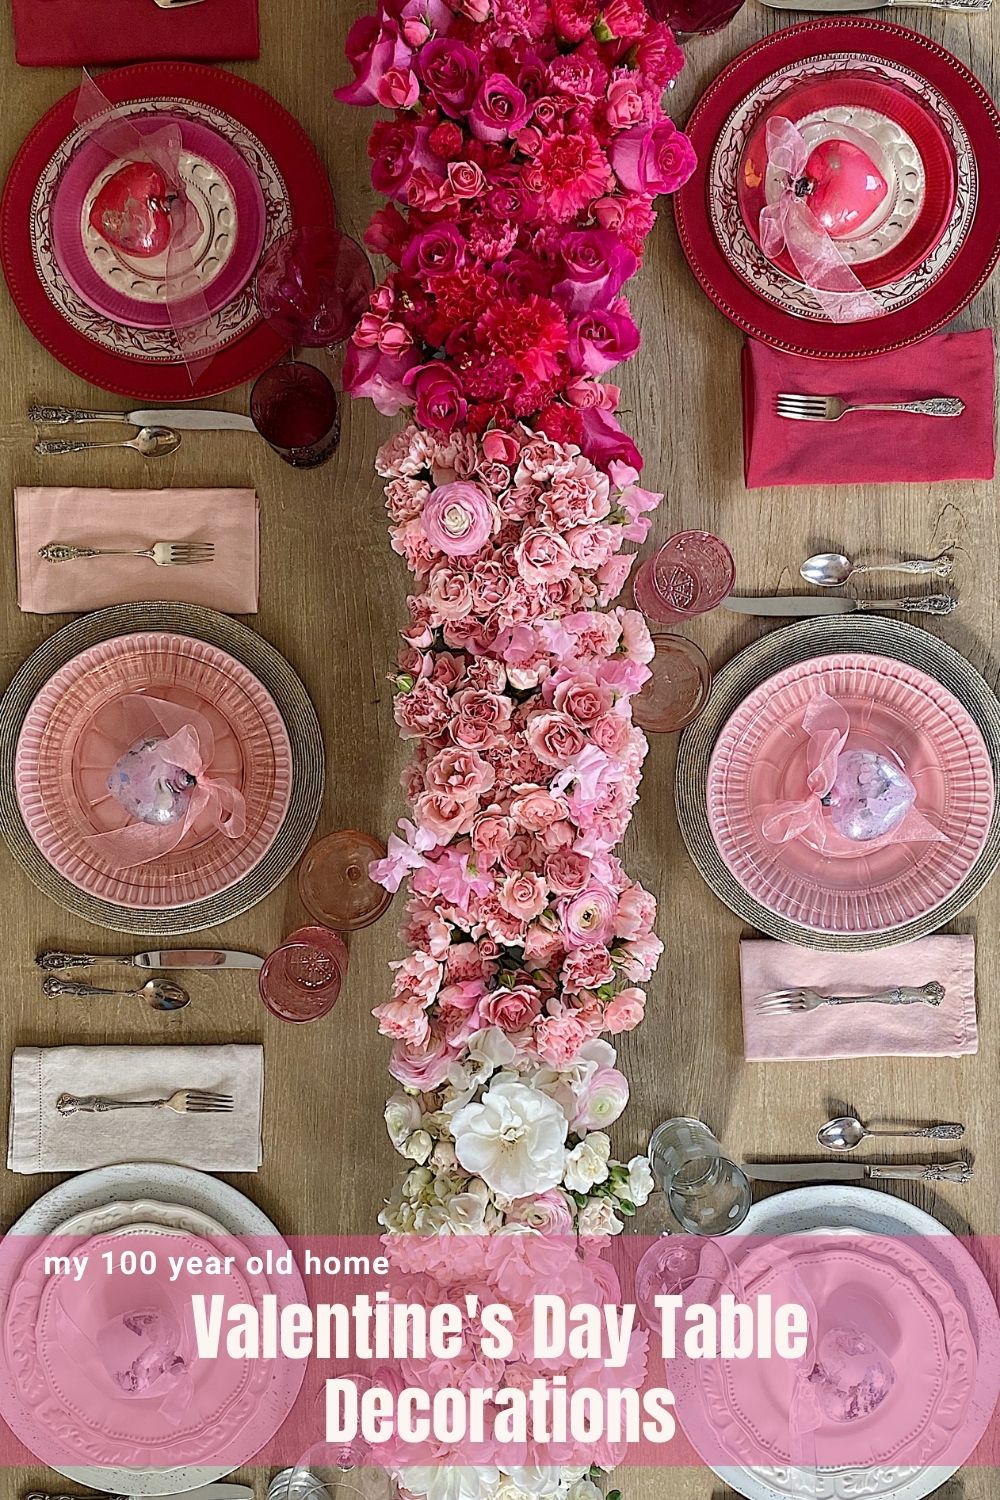 I love color and I am obsessed with my latest table creation. I created my first ombré table to use as Valentine's Day Table Decorations.